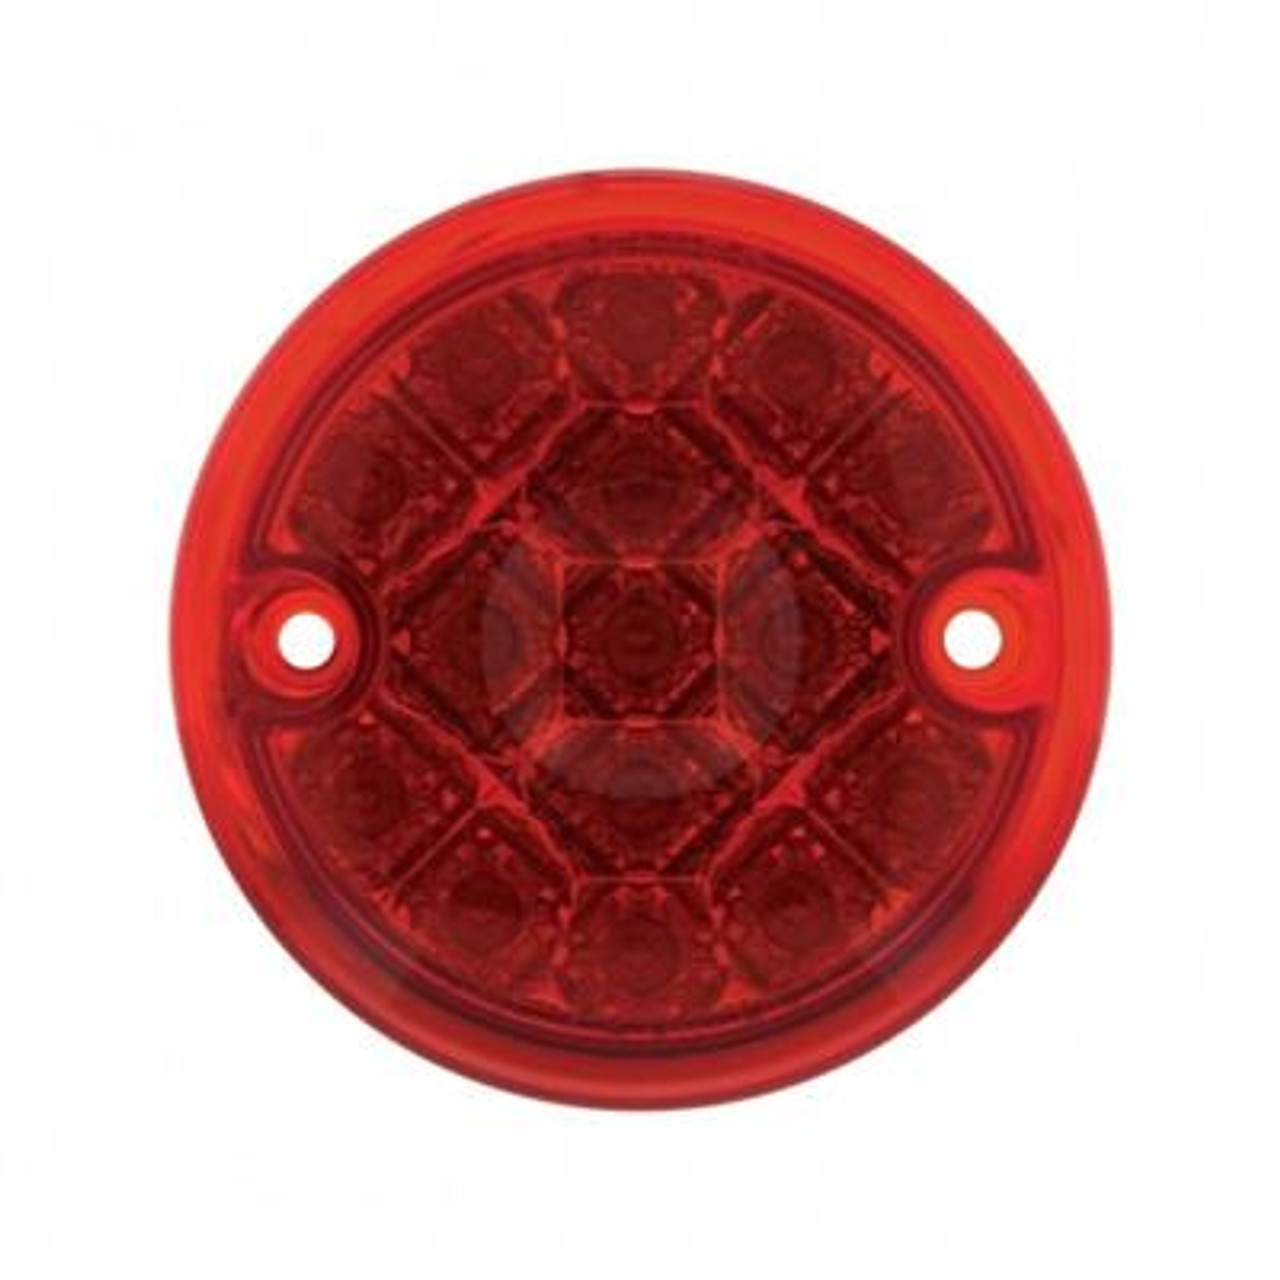 30 LED 3" Dual Function Reflector Double Face Light Kit - Amber & Red LED/Amber & Red Lens